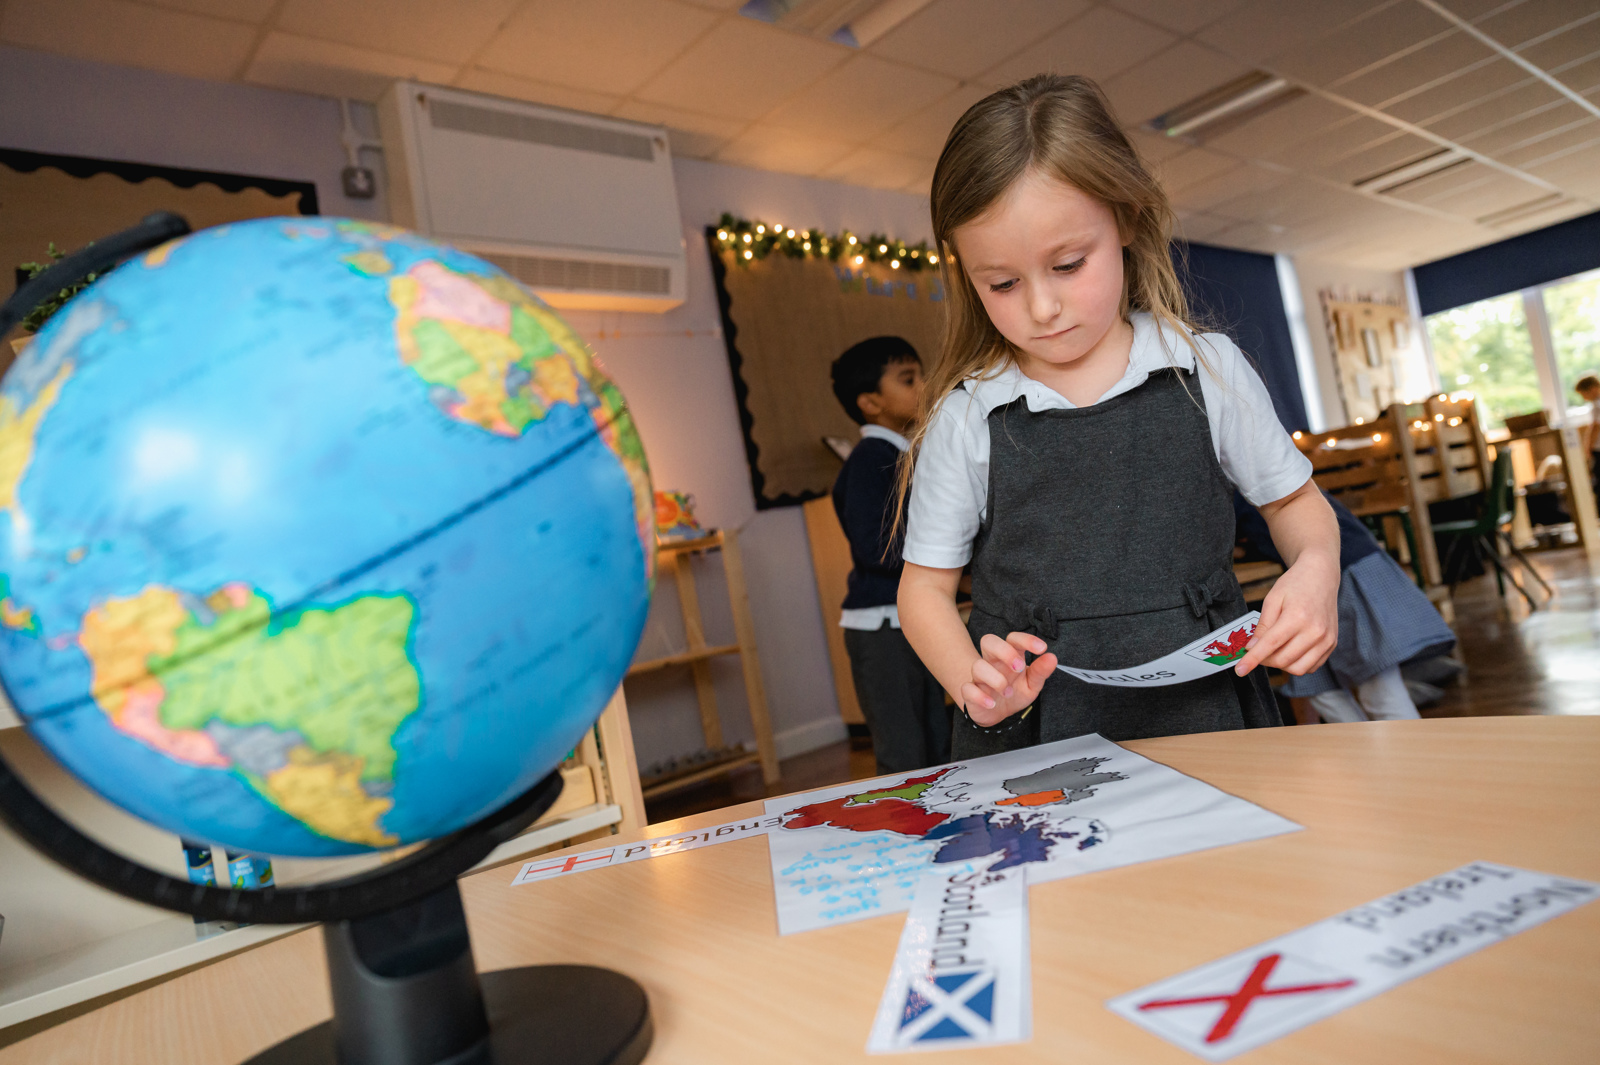 A year 1 girl matches flags of Great Britain with the corresponding areas of the country, a globe sits in the foreground.